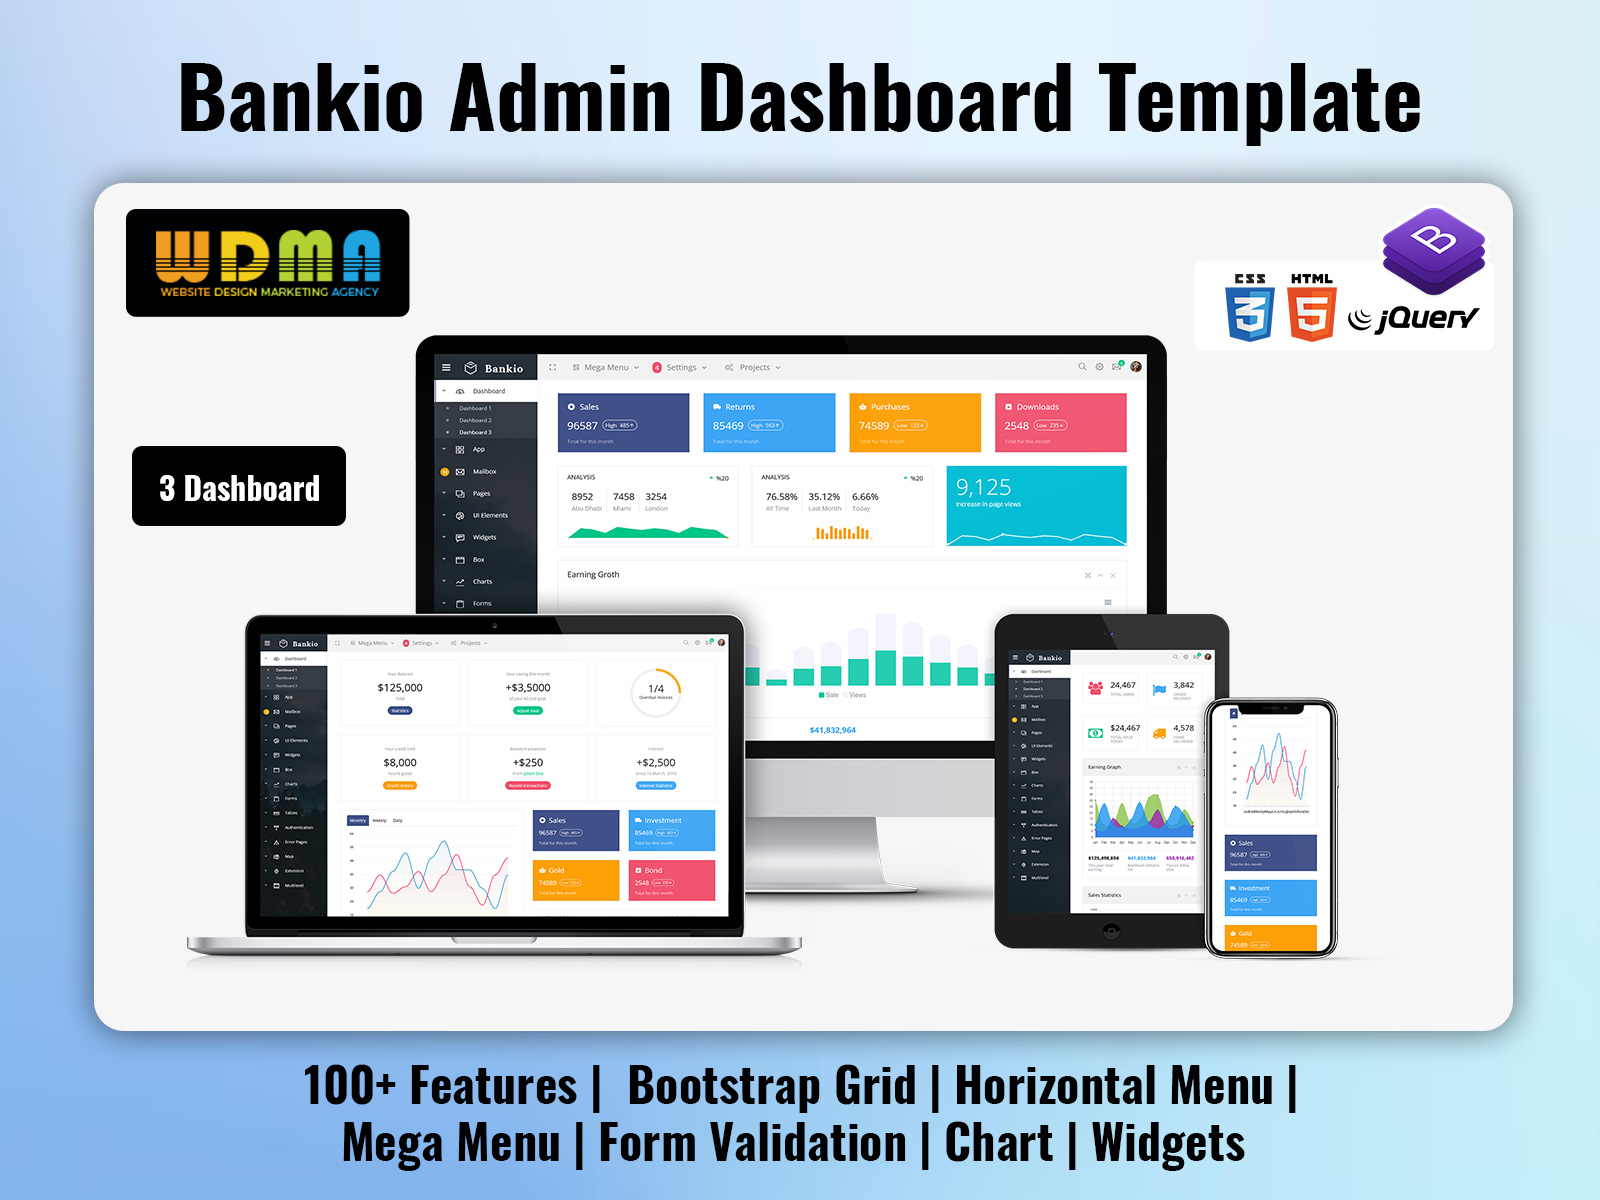 Bankio: Discover The Best Bootstrap Admin Dashboard For Your Website